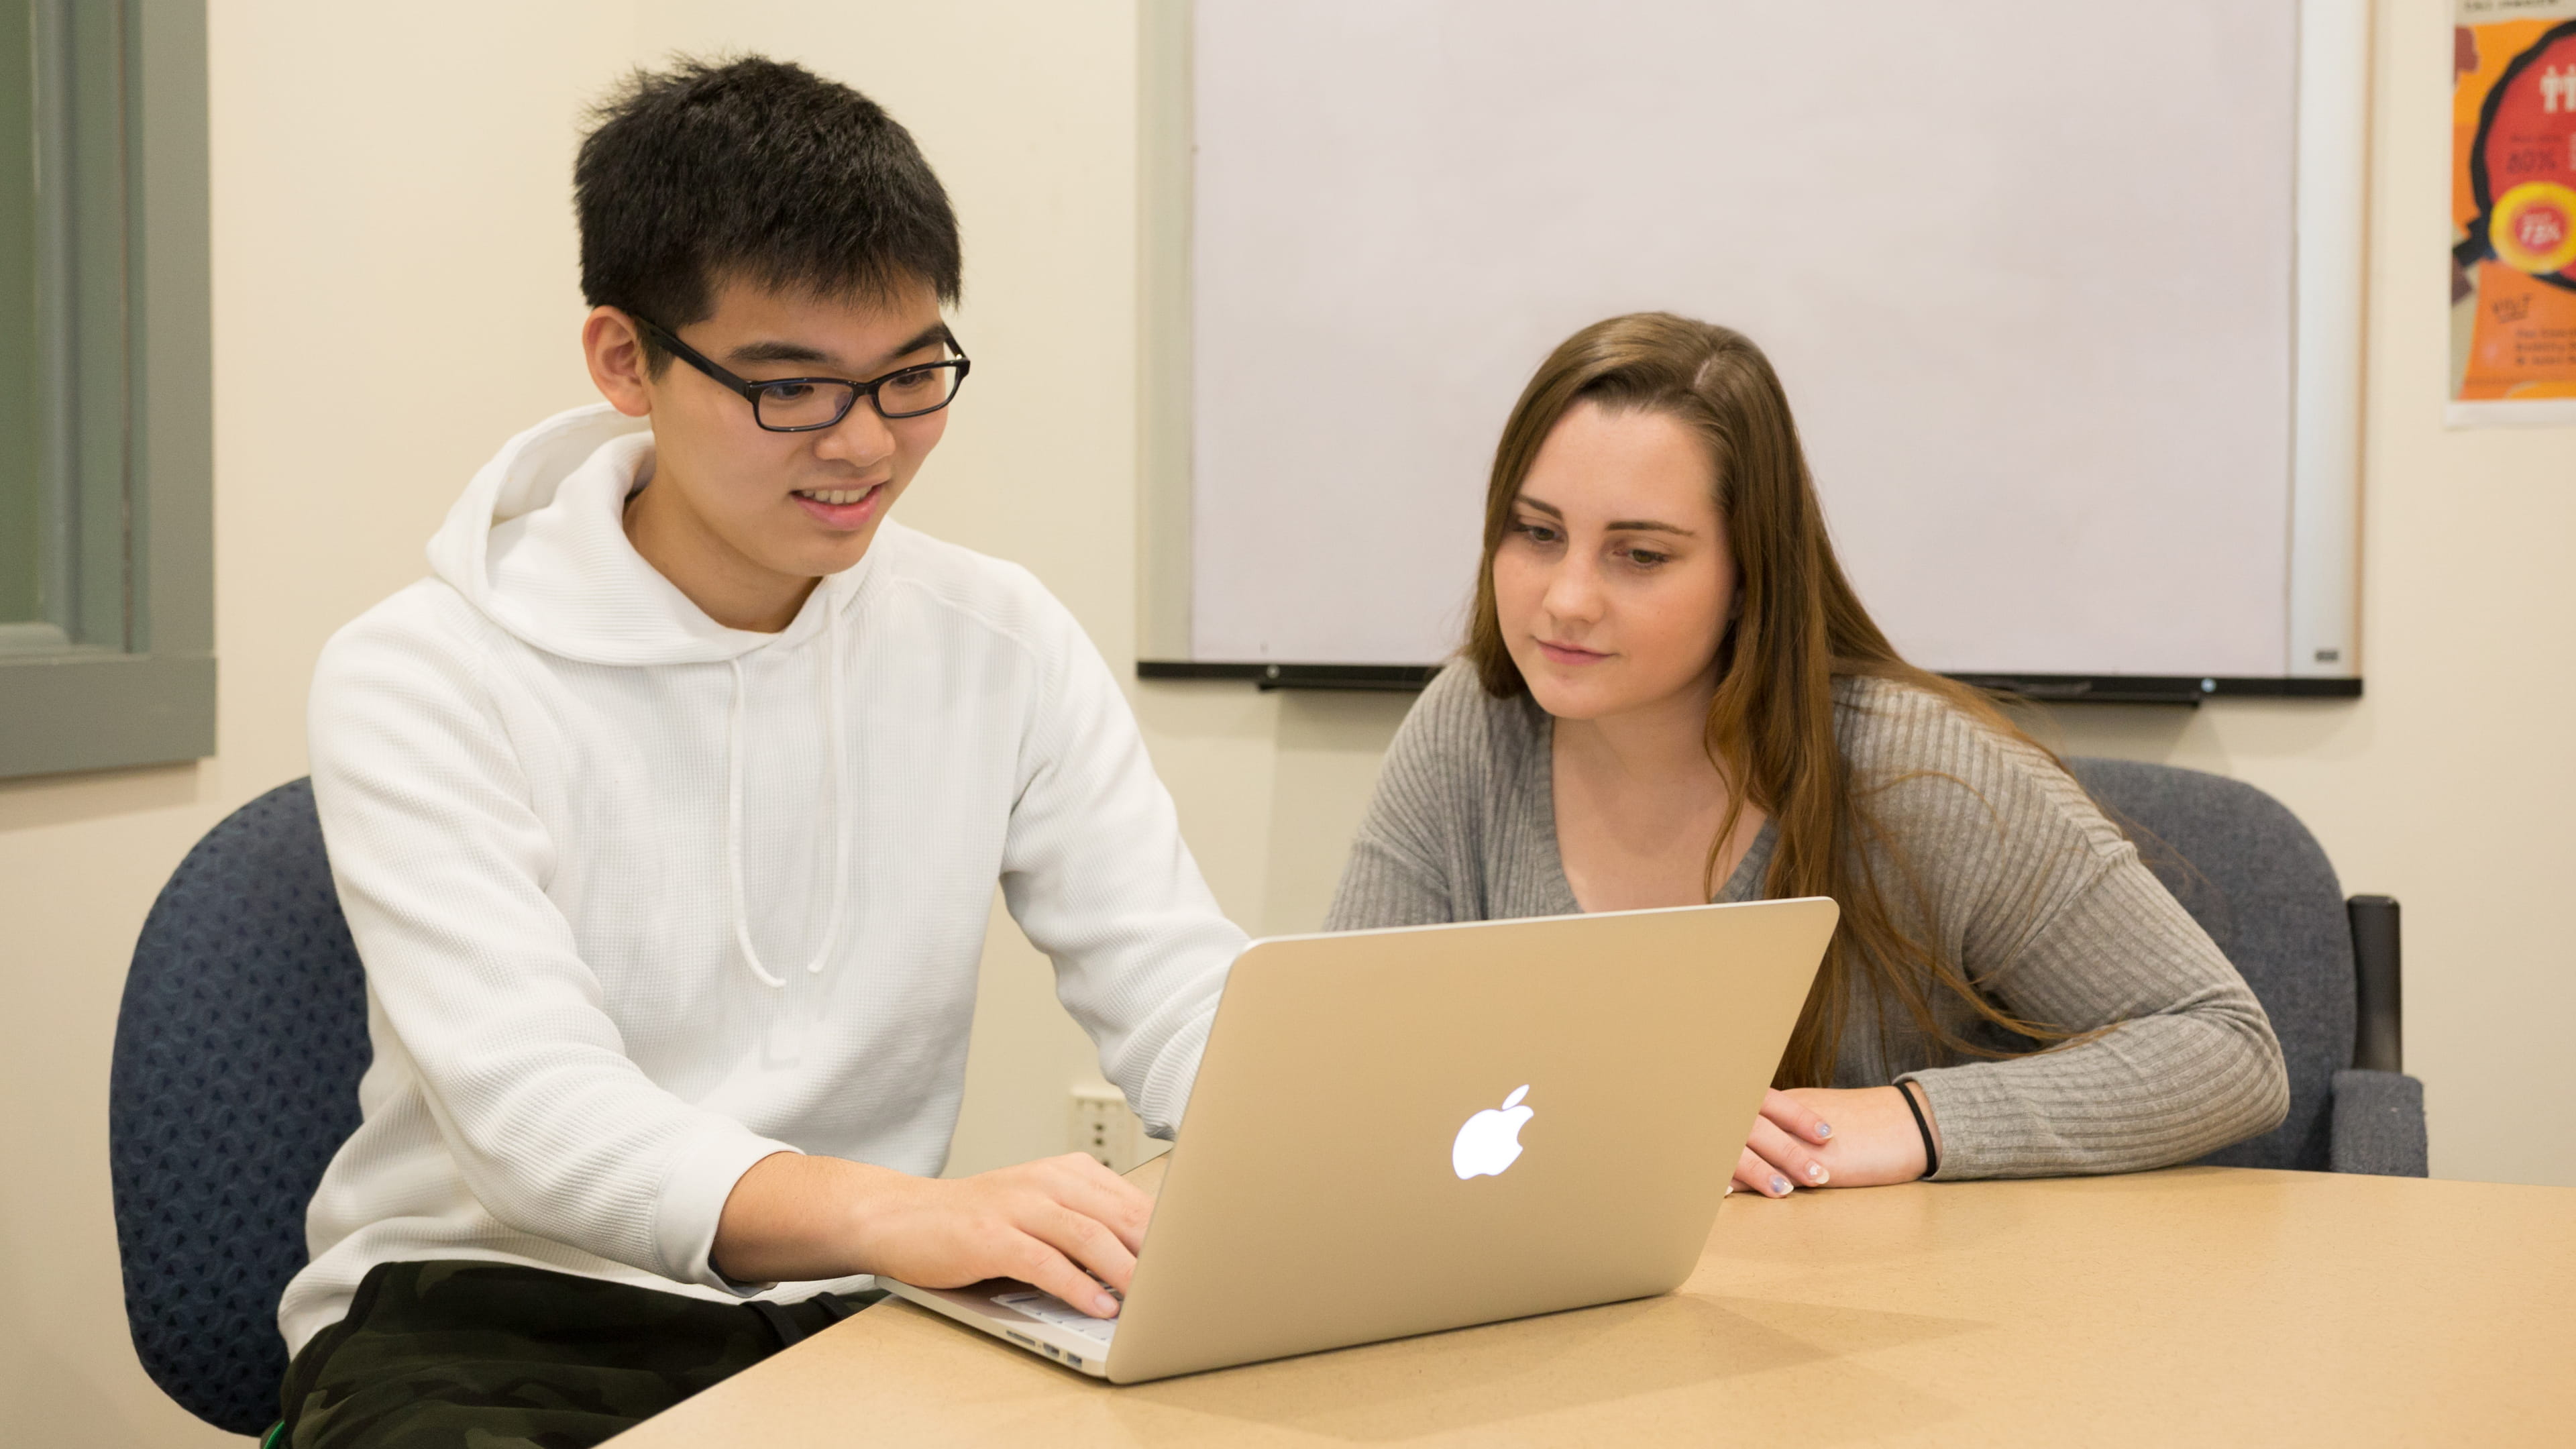 Two students work on laptop in classroom